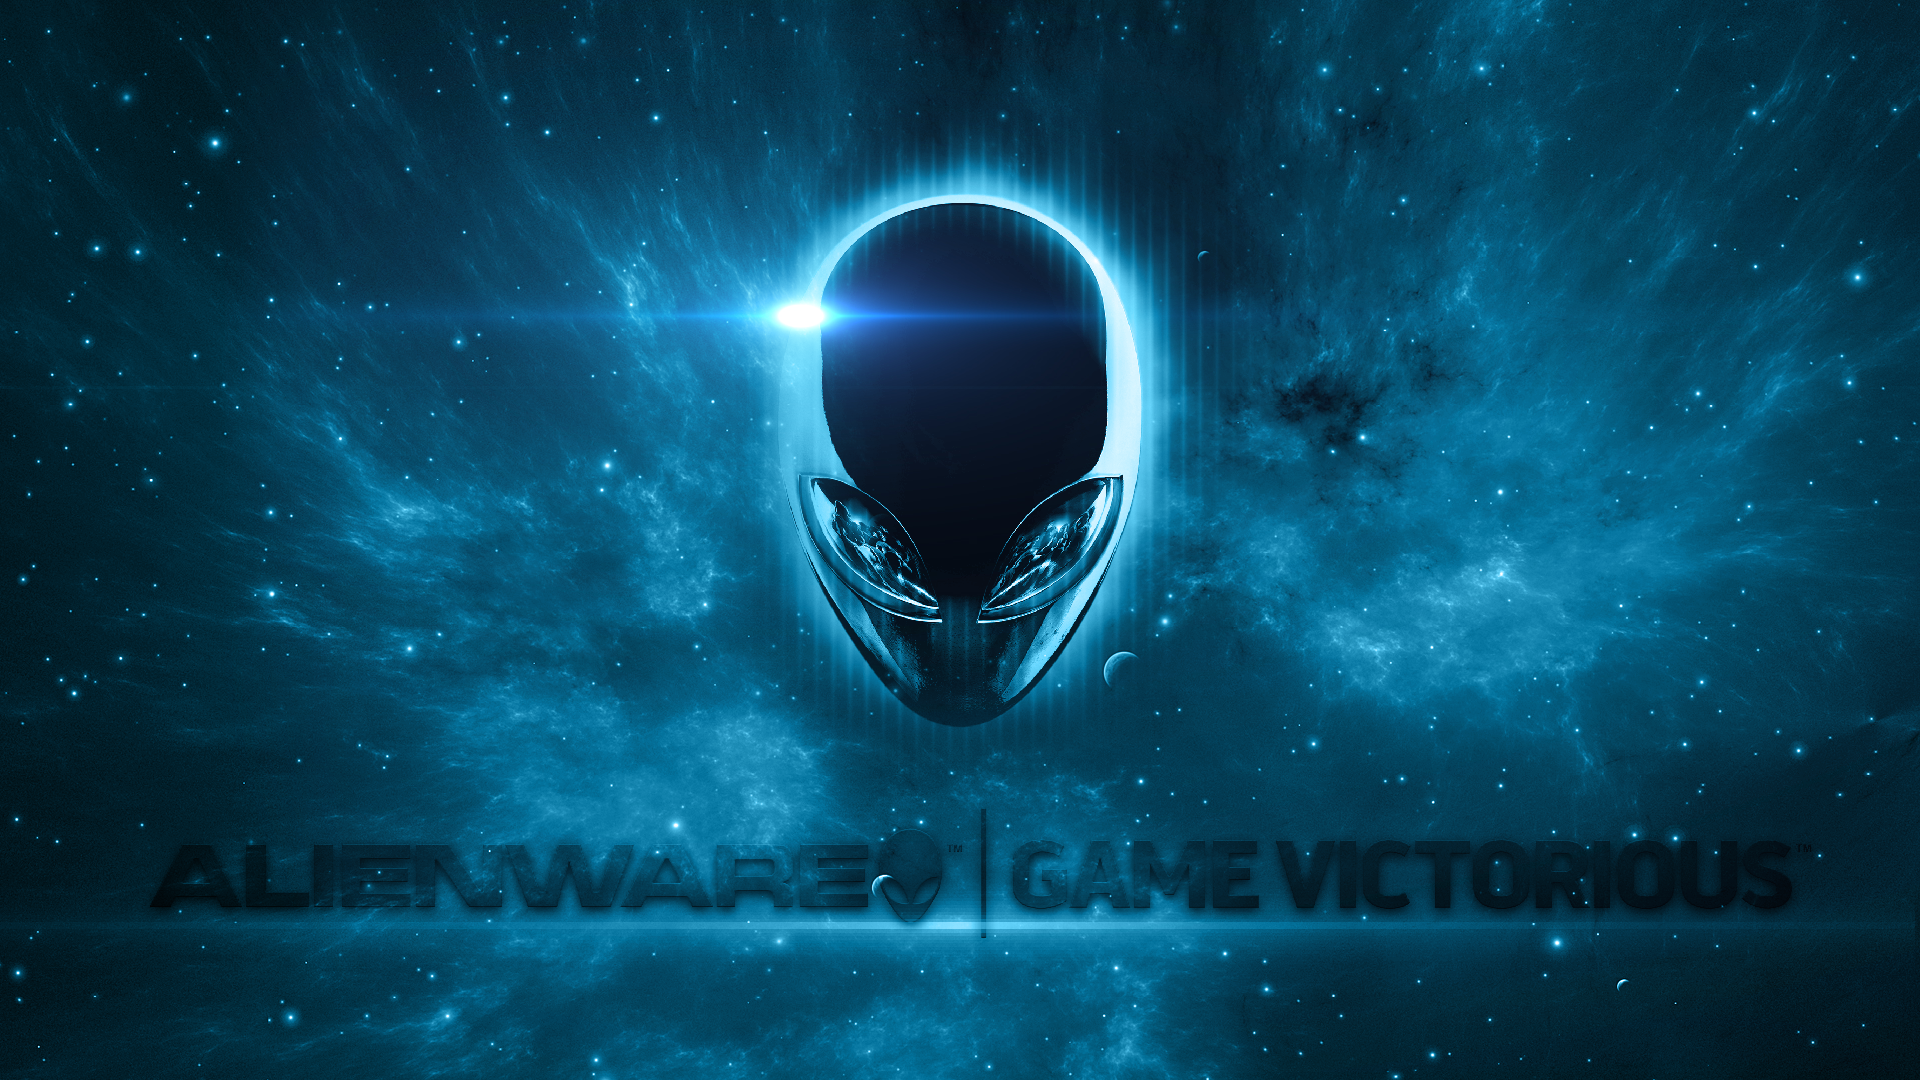 Space Alienware Wallpaper For Your